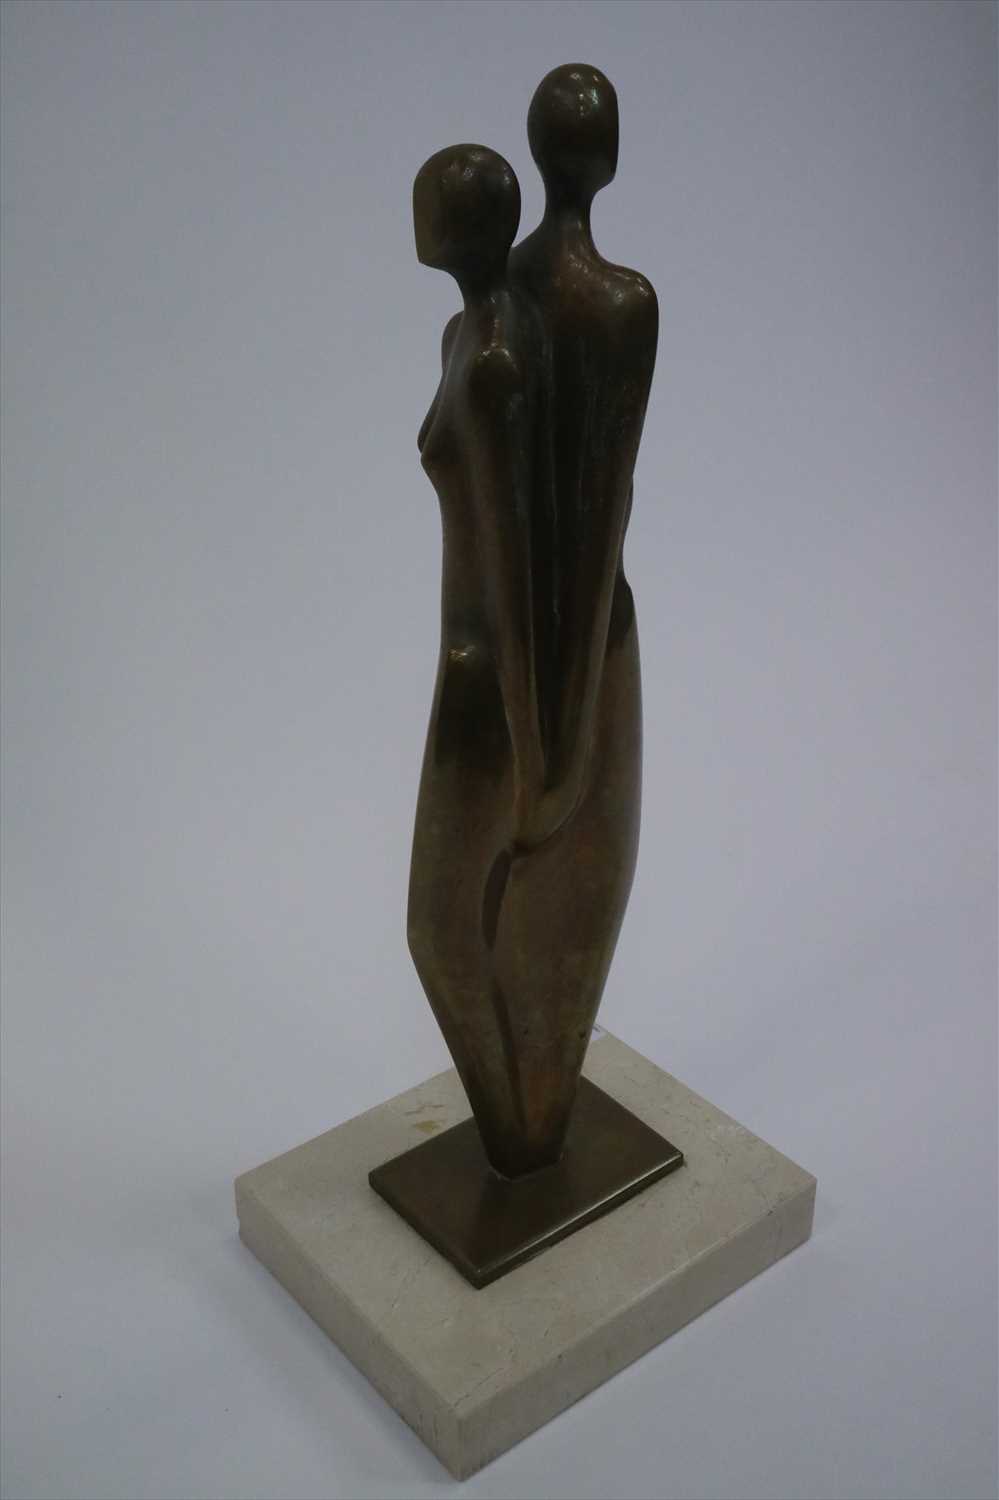 Lot 21 - Bronze Sculpture of an Entwined Couple with Marble Base